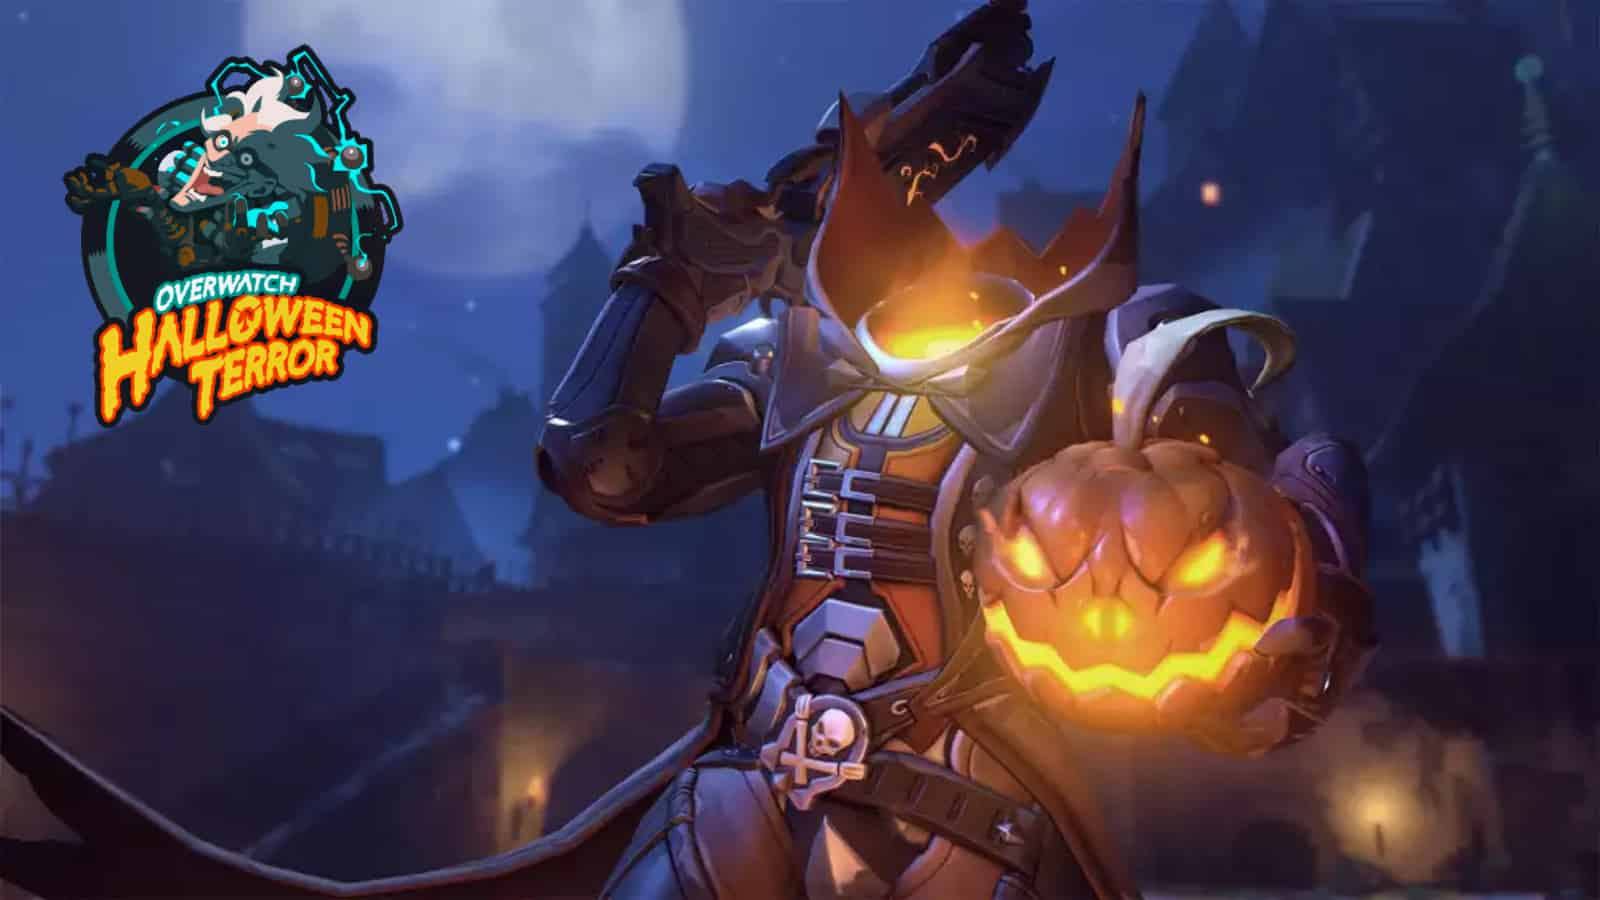 Overwatch Reaper as a headless character holding his pumpkin head in his hand